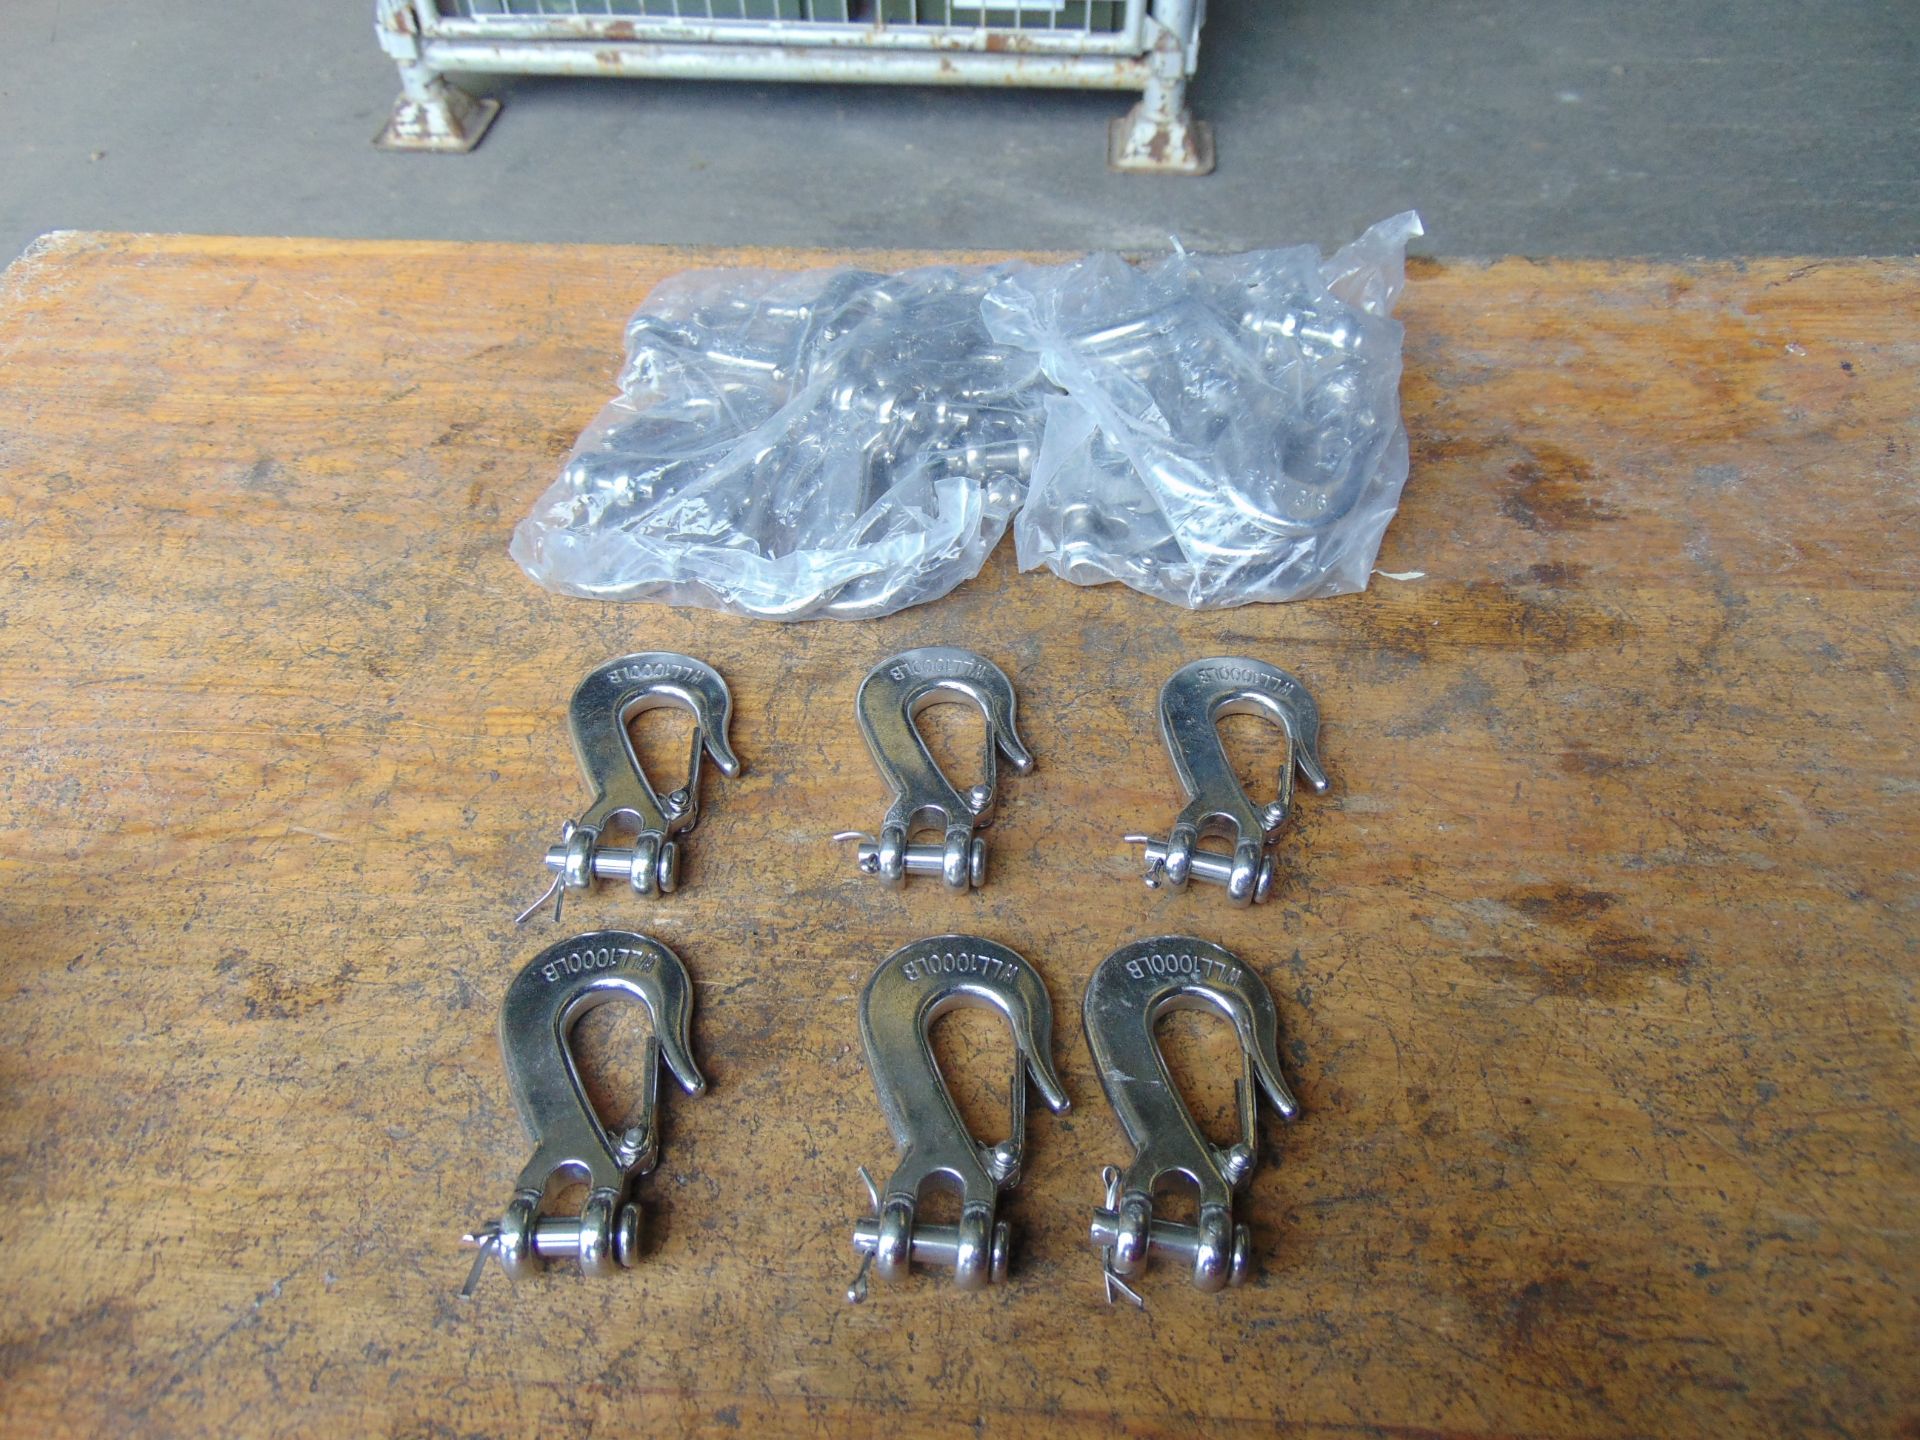 25 x New Unissued Stainless Steel 100016 Hooks c/w Pins etc, Original Packing - Image 5 of 5